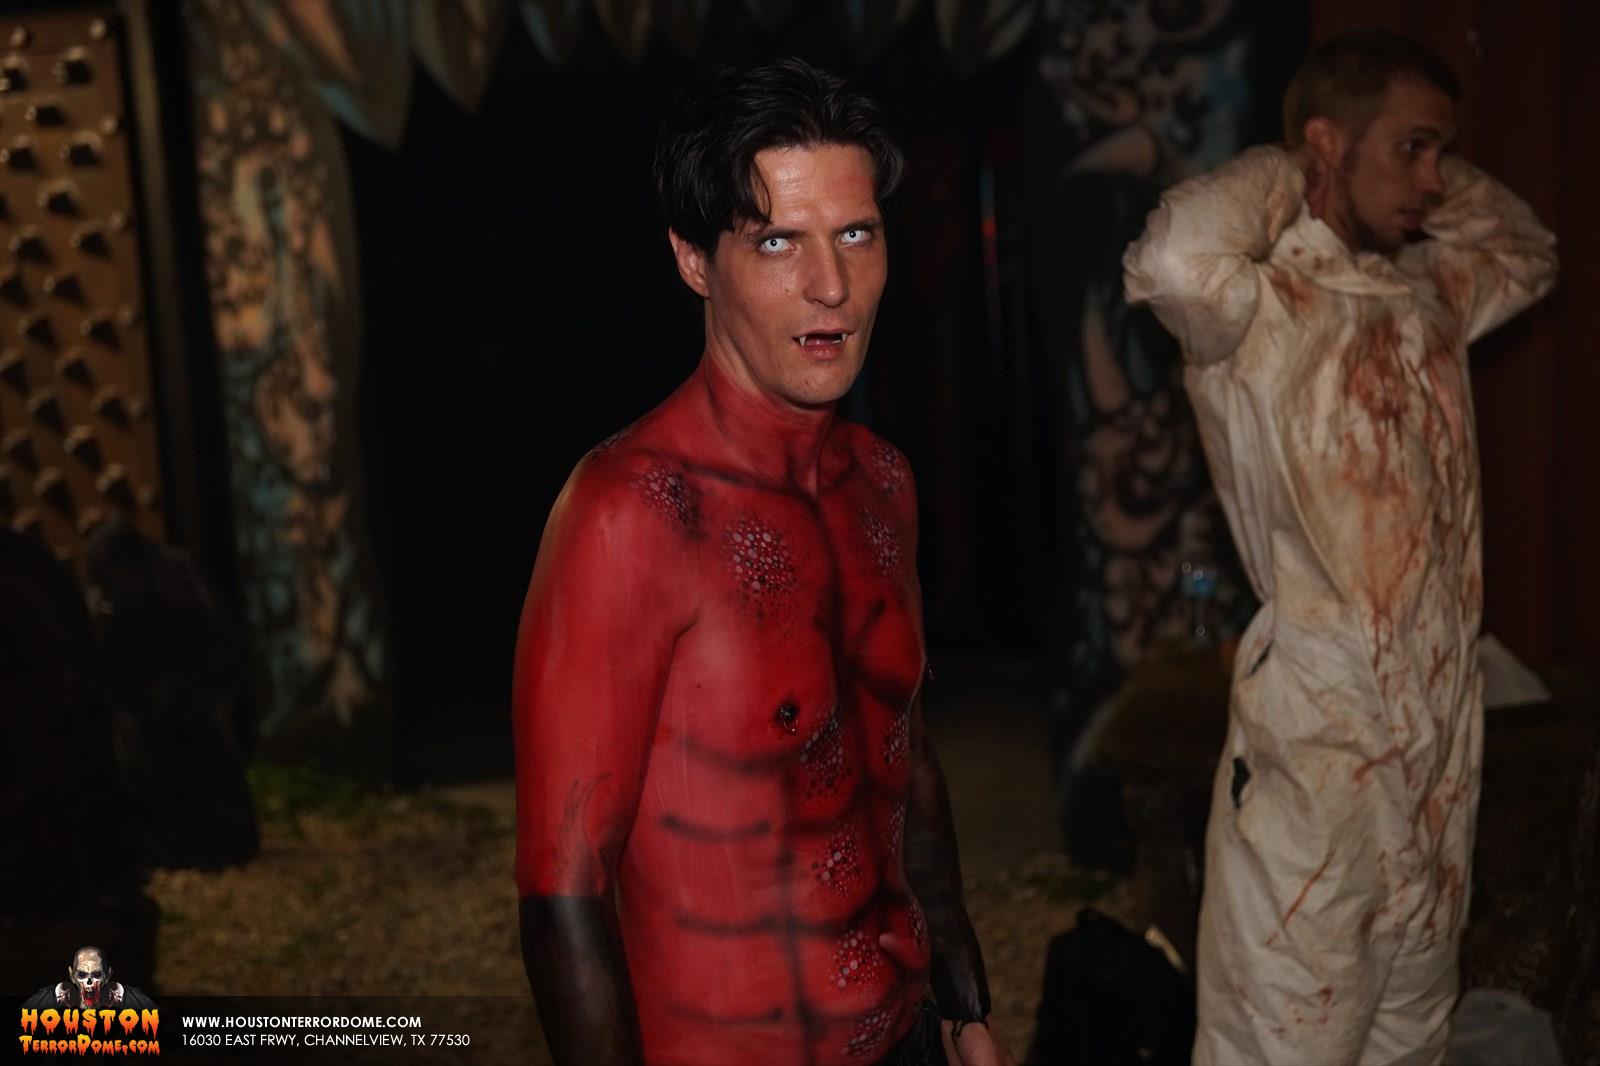 Devil already has body paint, Contacts, and Fangs